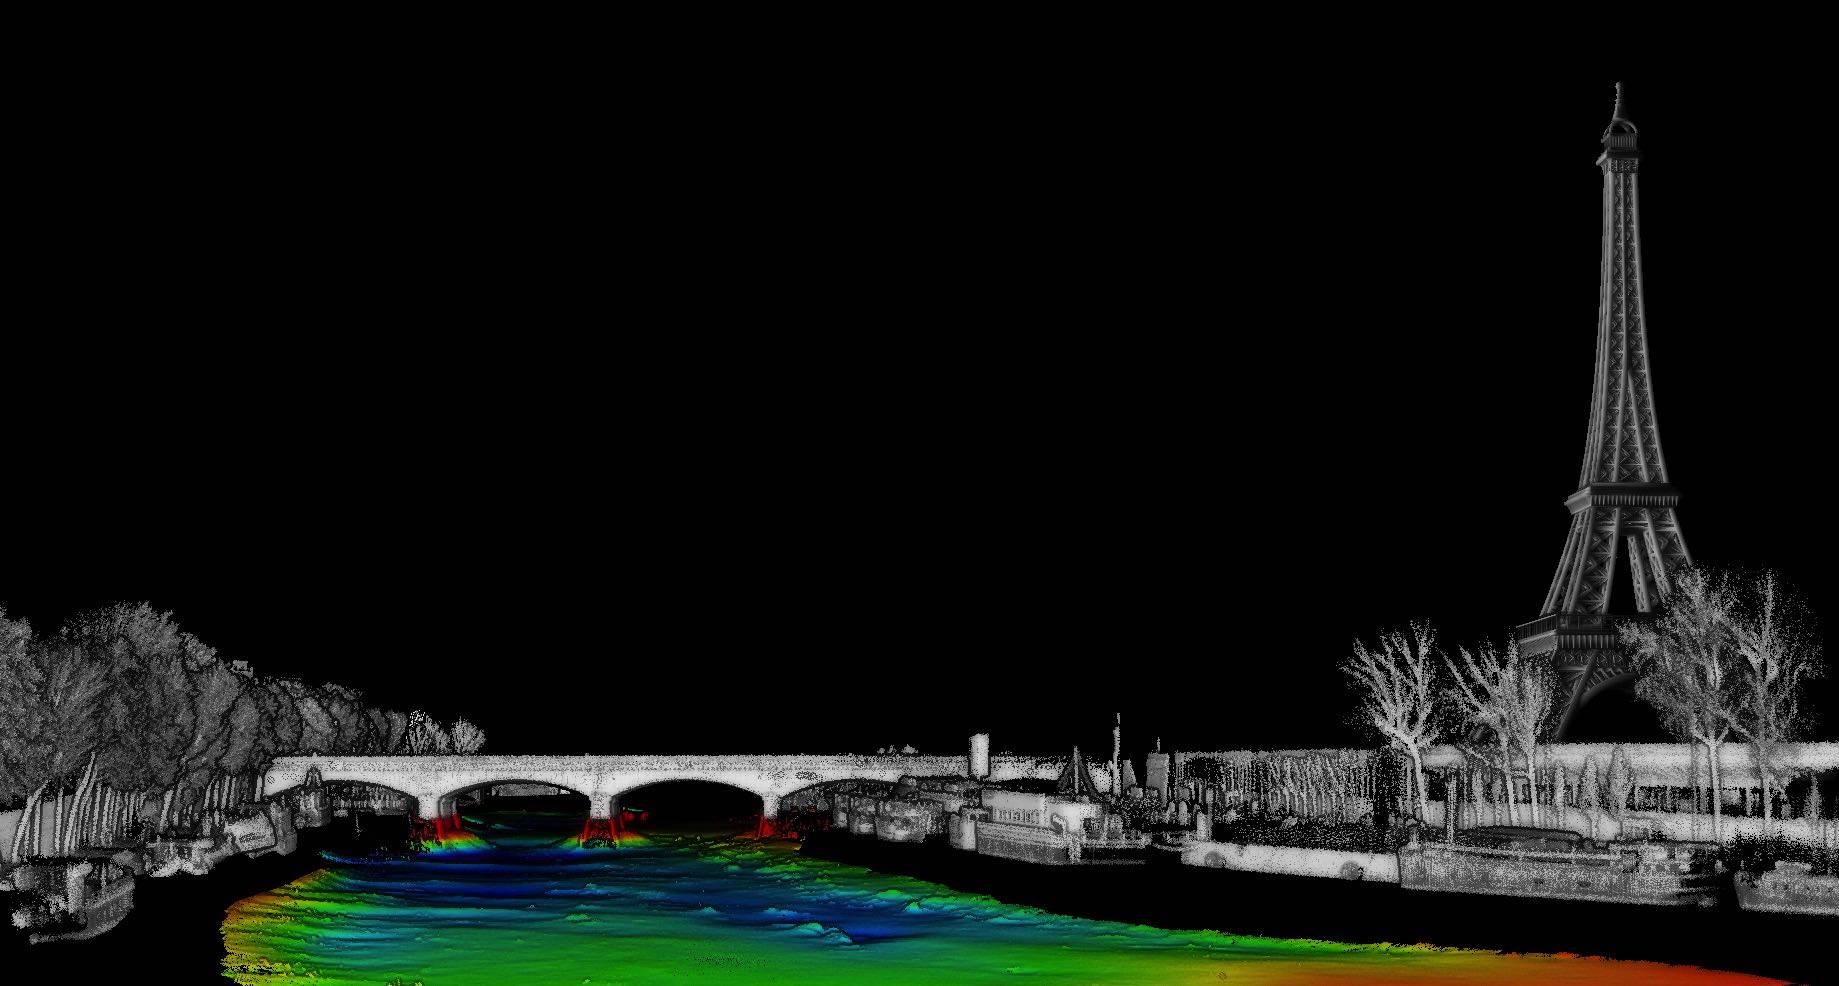 Bathymetry and Backscatter Data Survey in Paris Using Multibeam Echosounder and Lidar System seine river point cloud